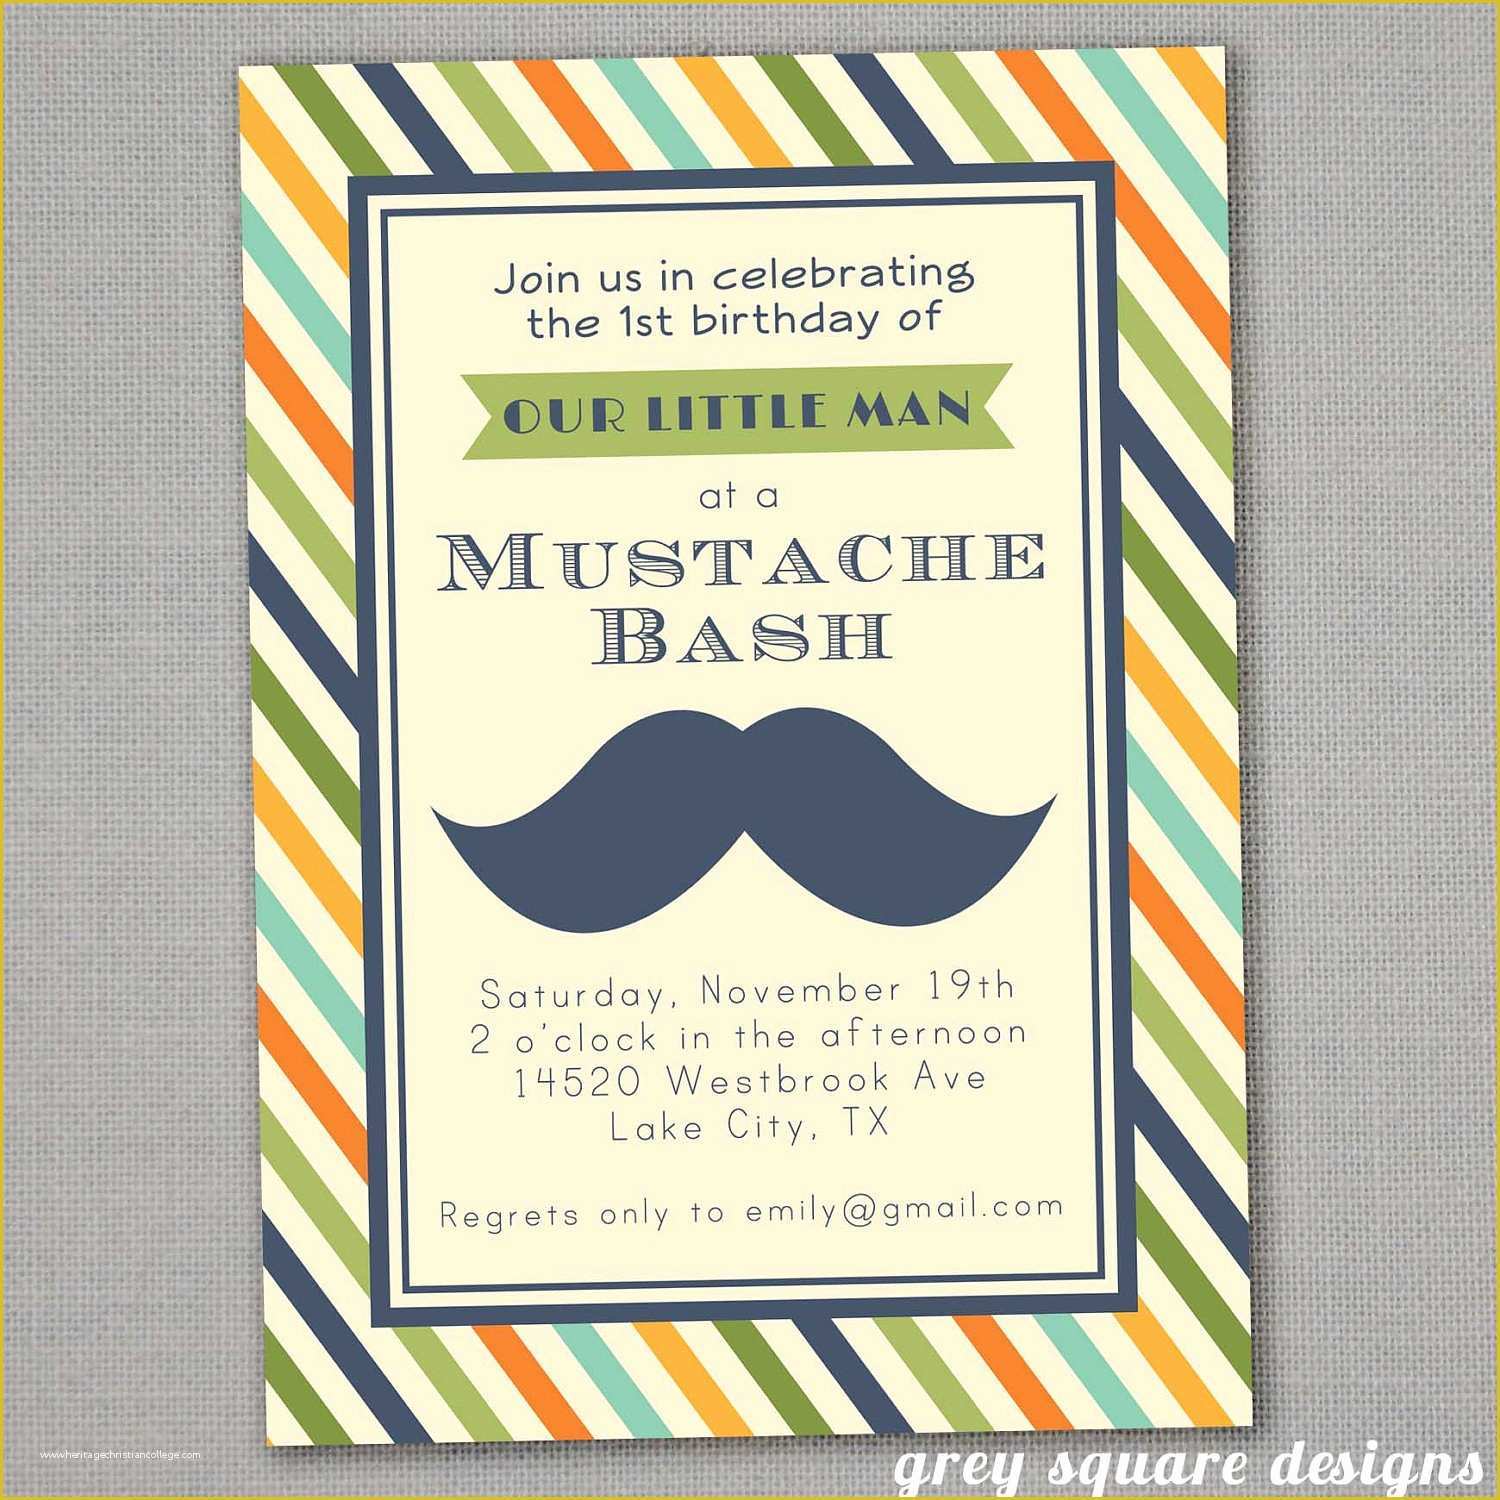 Little Man Birthday Invitation Template Free Of Mustache Party Invitations In Addition to Redesign Your